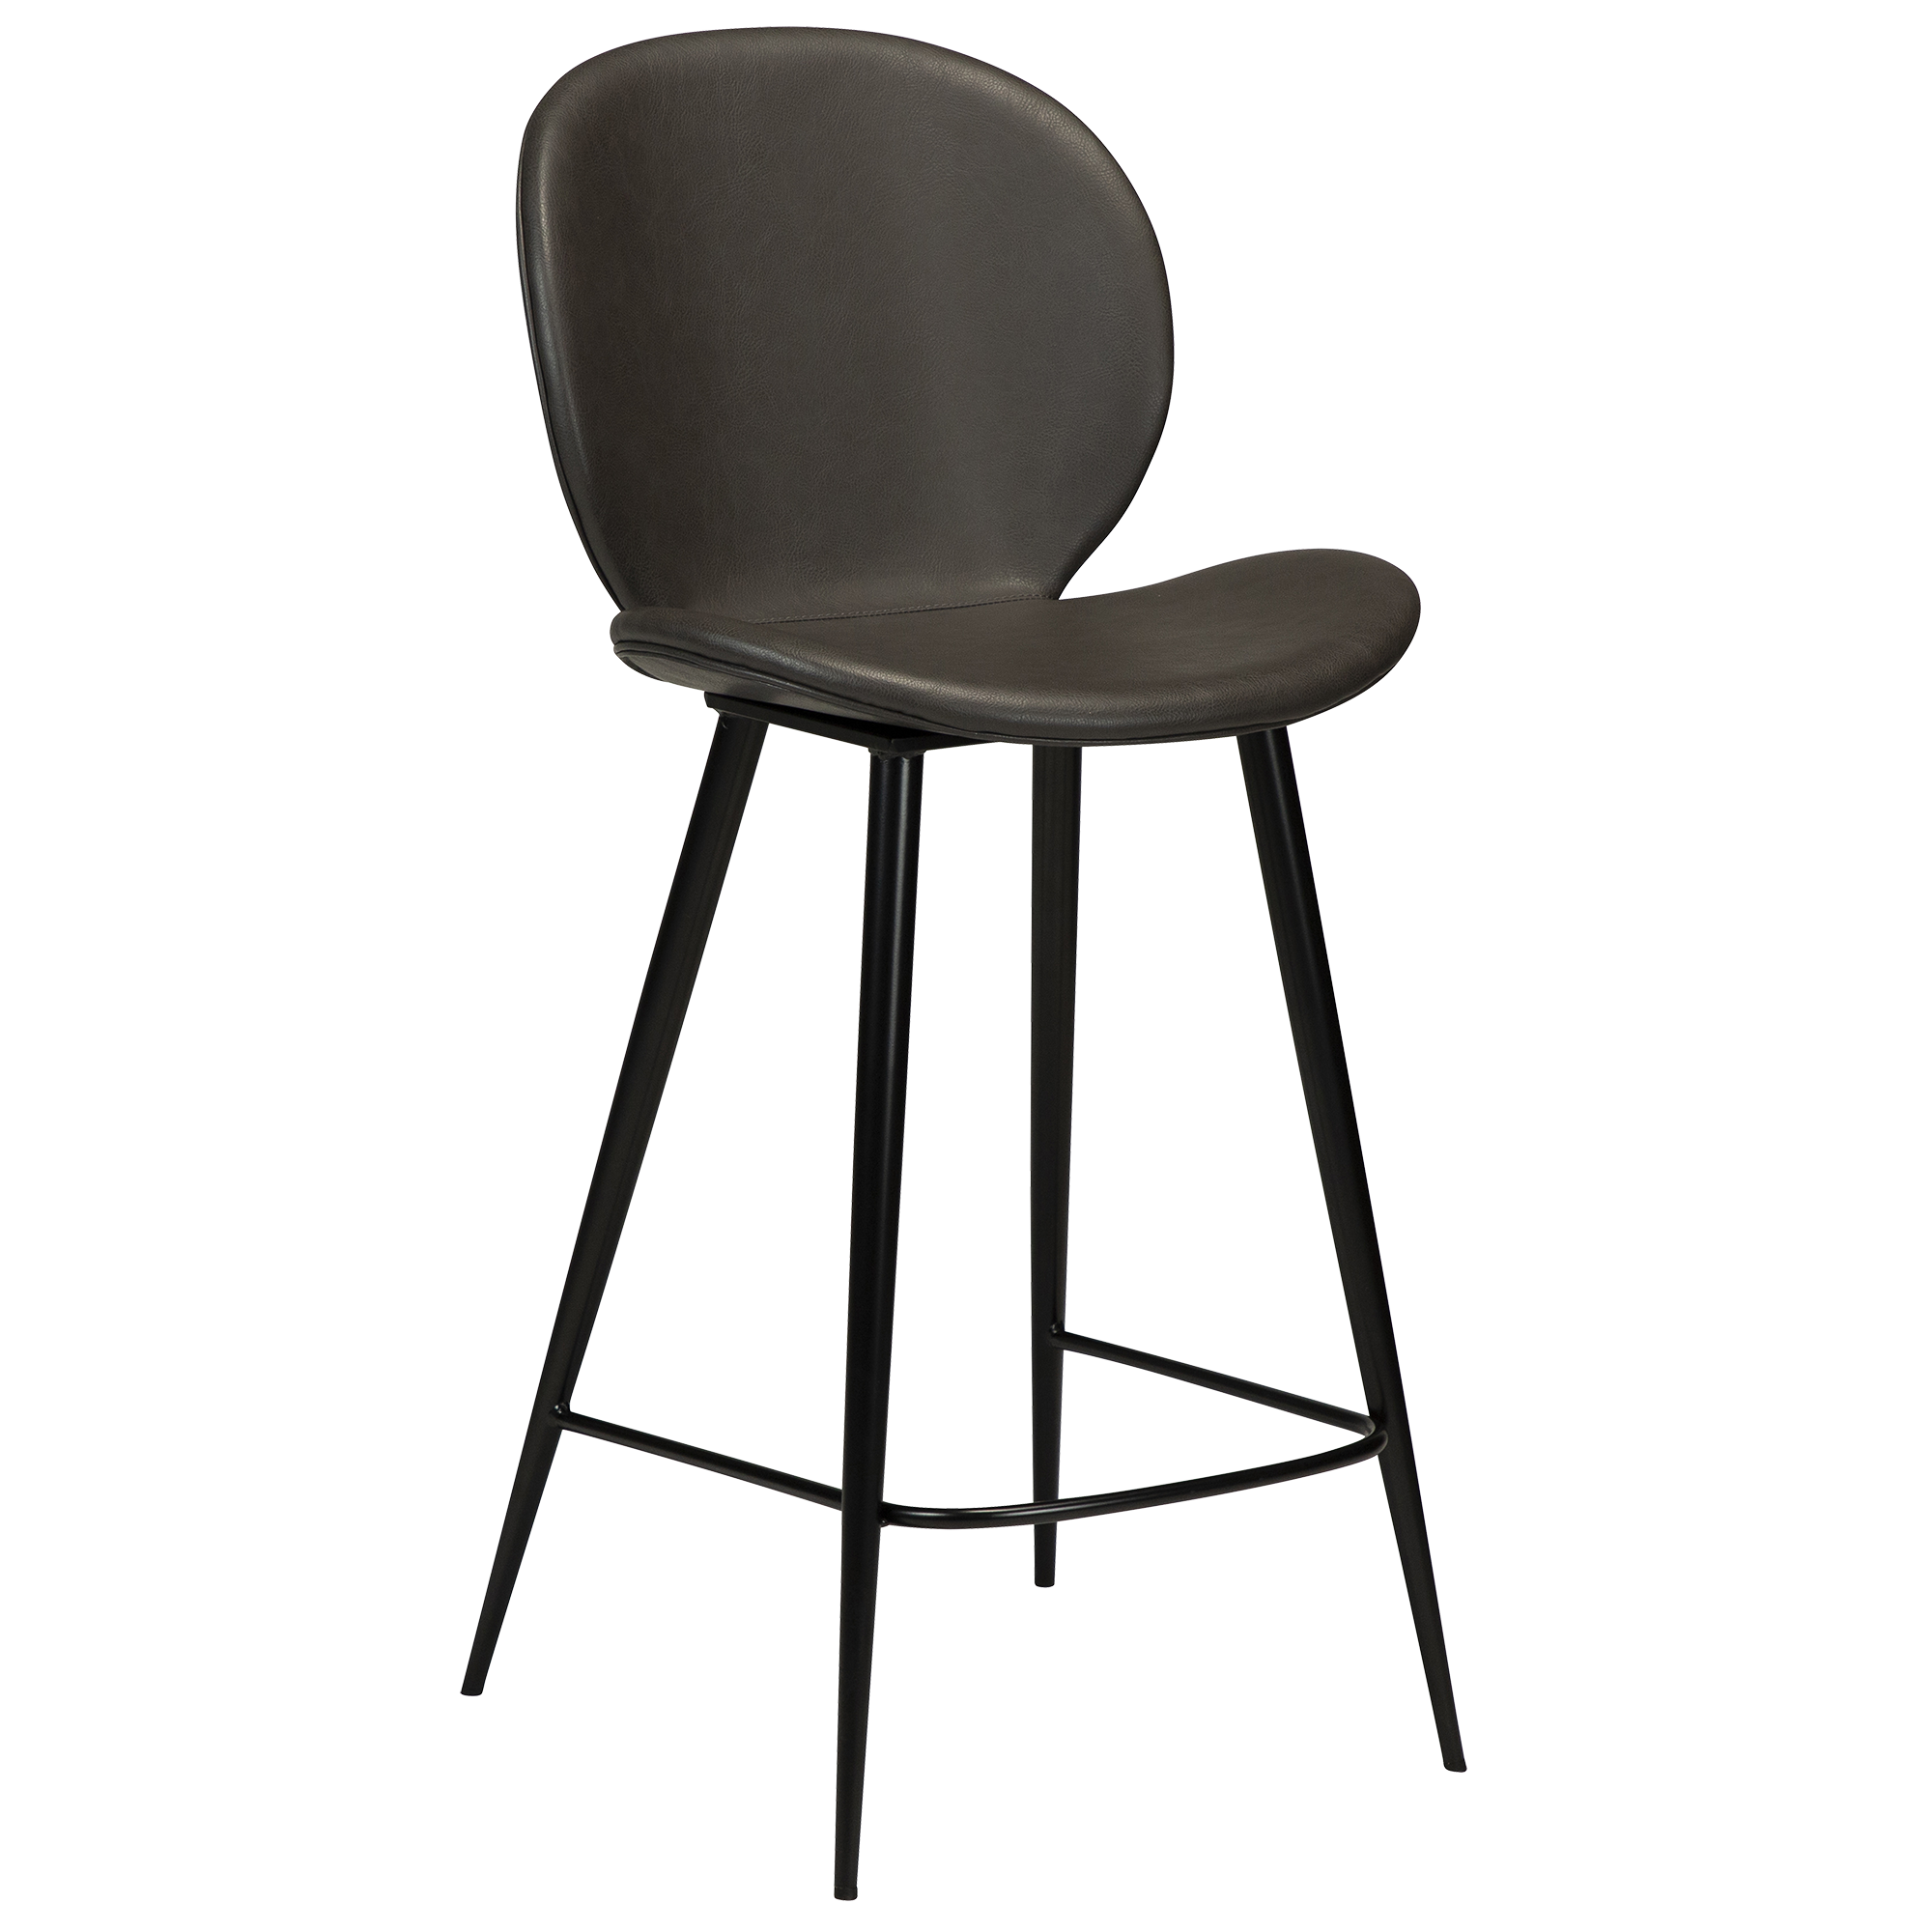 Cloud Counter Stool Vintage Grey Art Leather With Black Metal Legs 300800220 01 Main